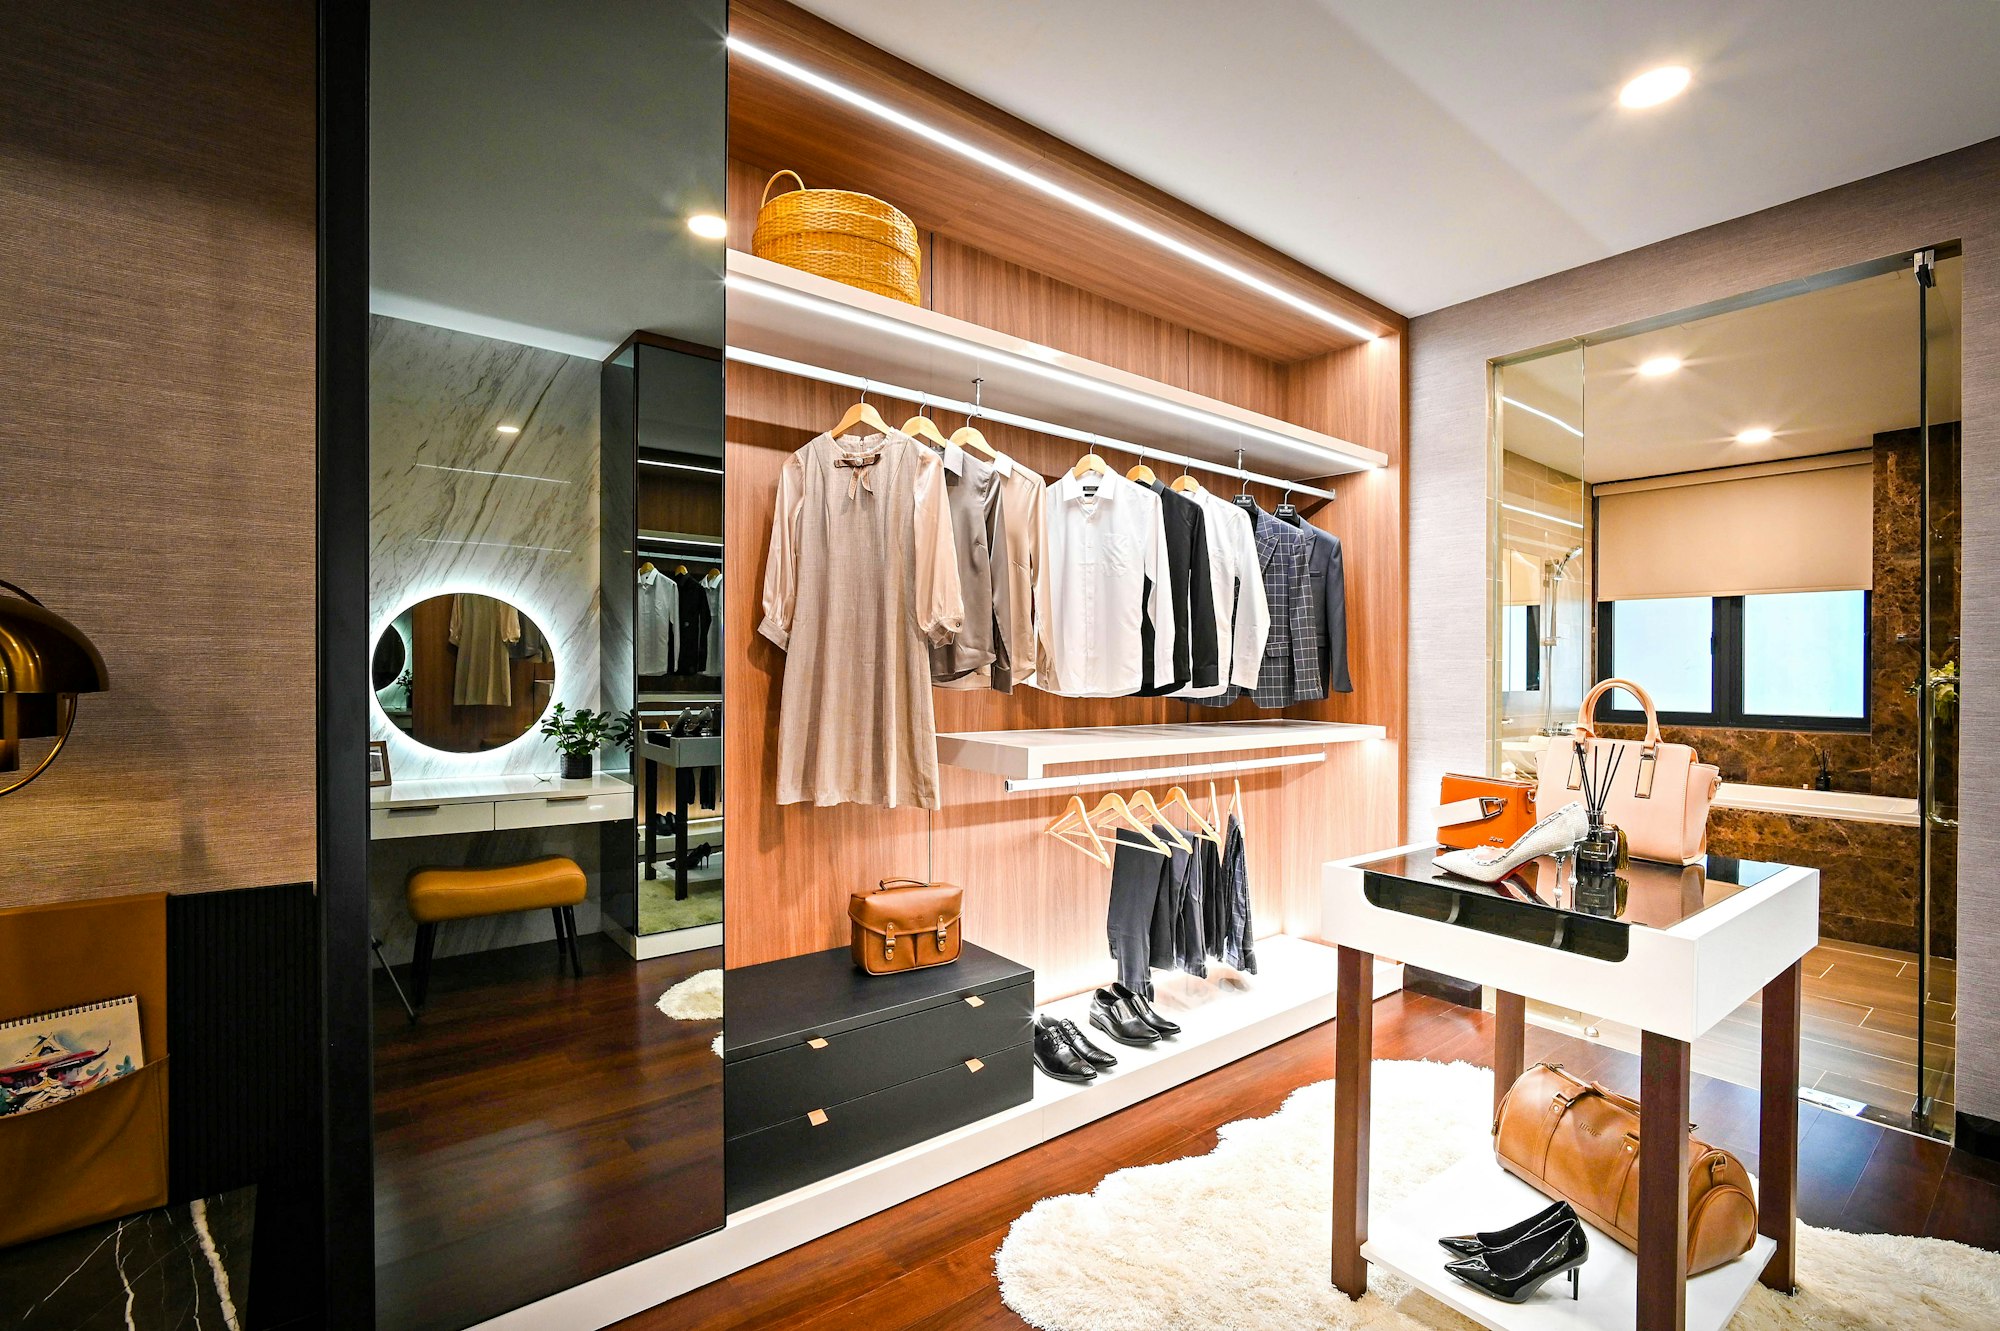 The Best Walk-in Closet Ideas, Design, And Inspiration